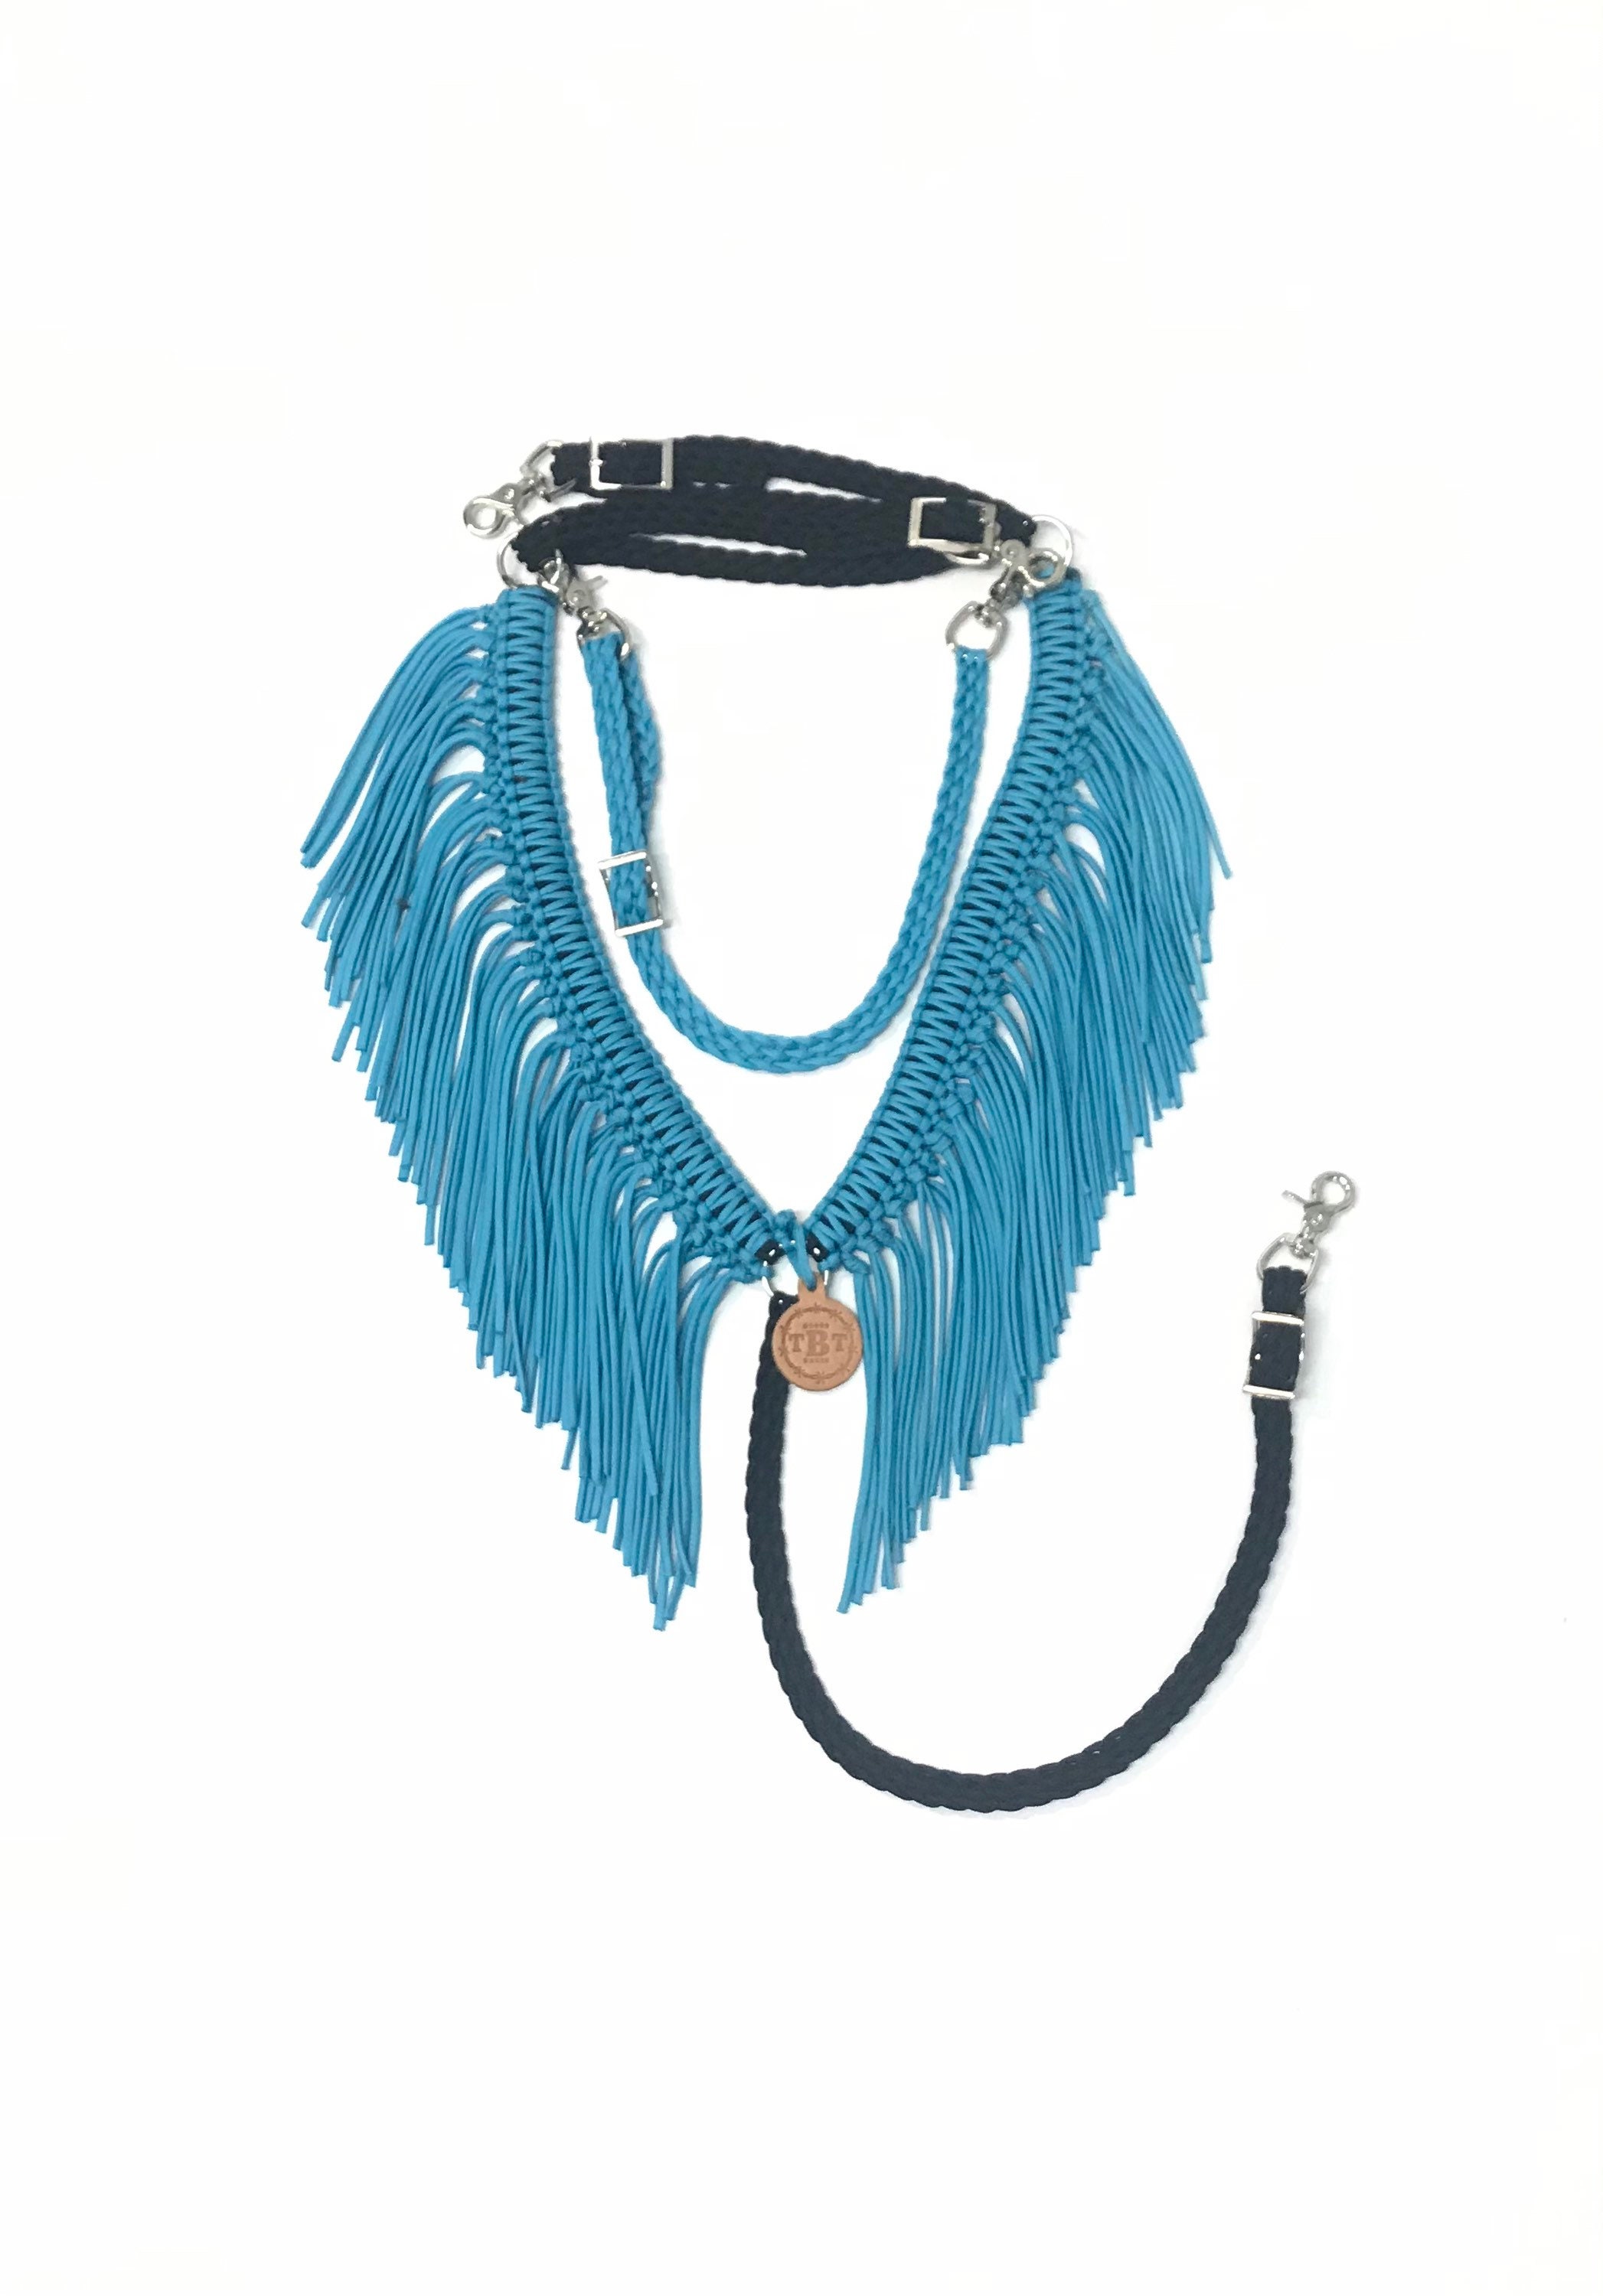 FREEDOM Colored Feather Leather Wither Strap Barrel Racing 2 Trigger Snaps 